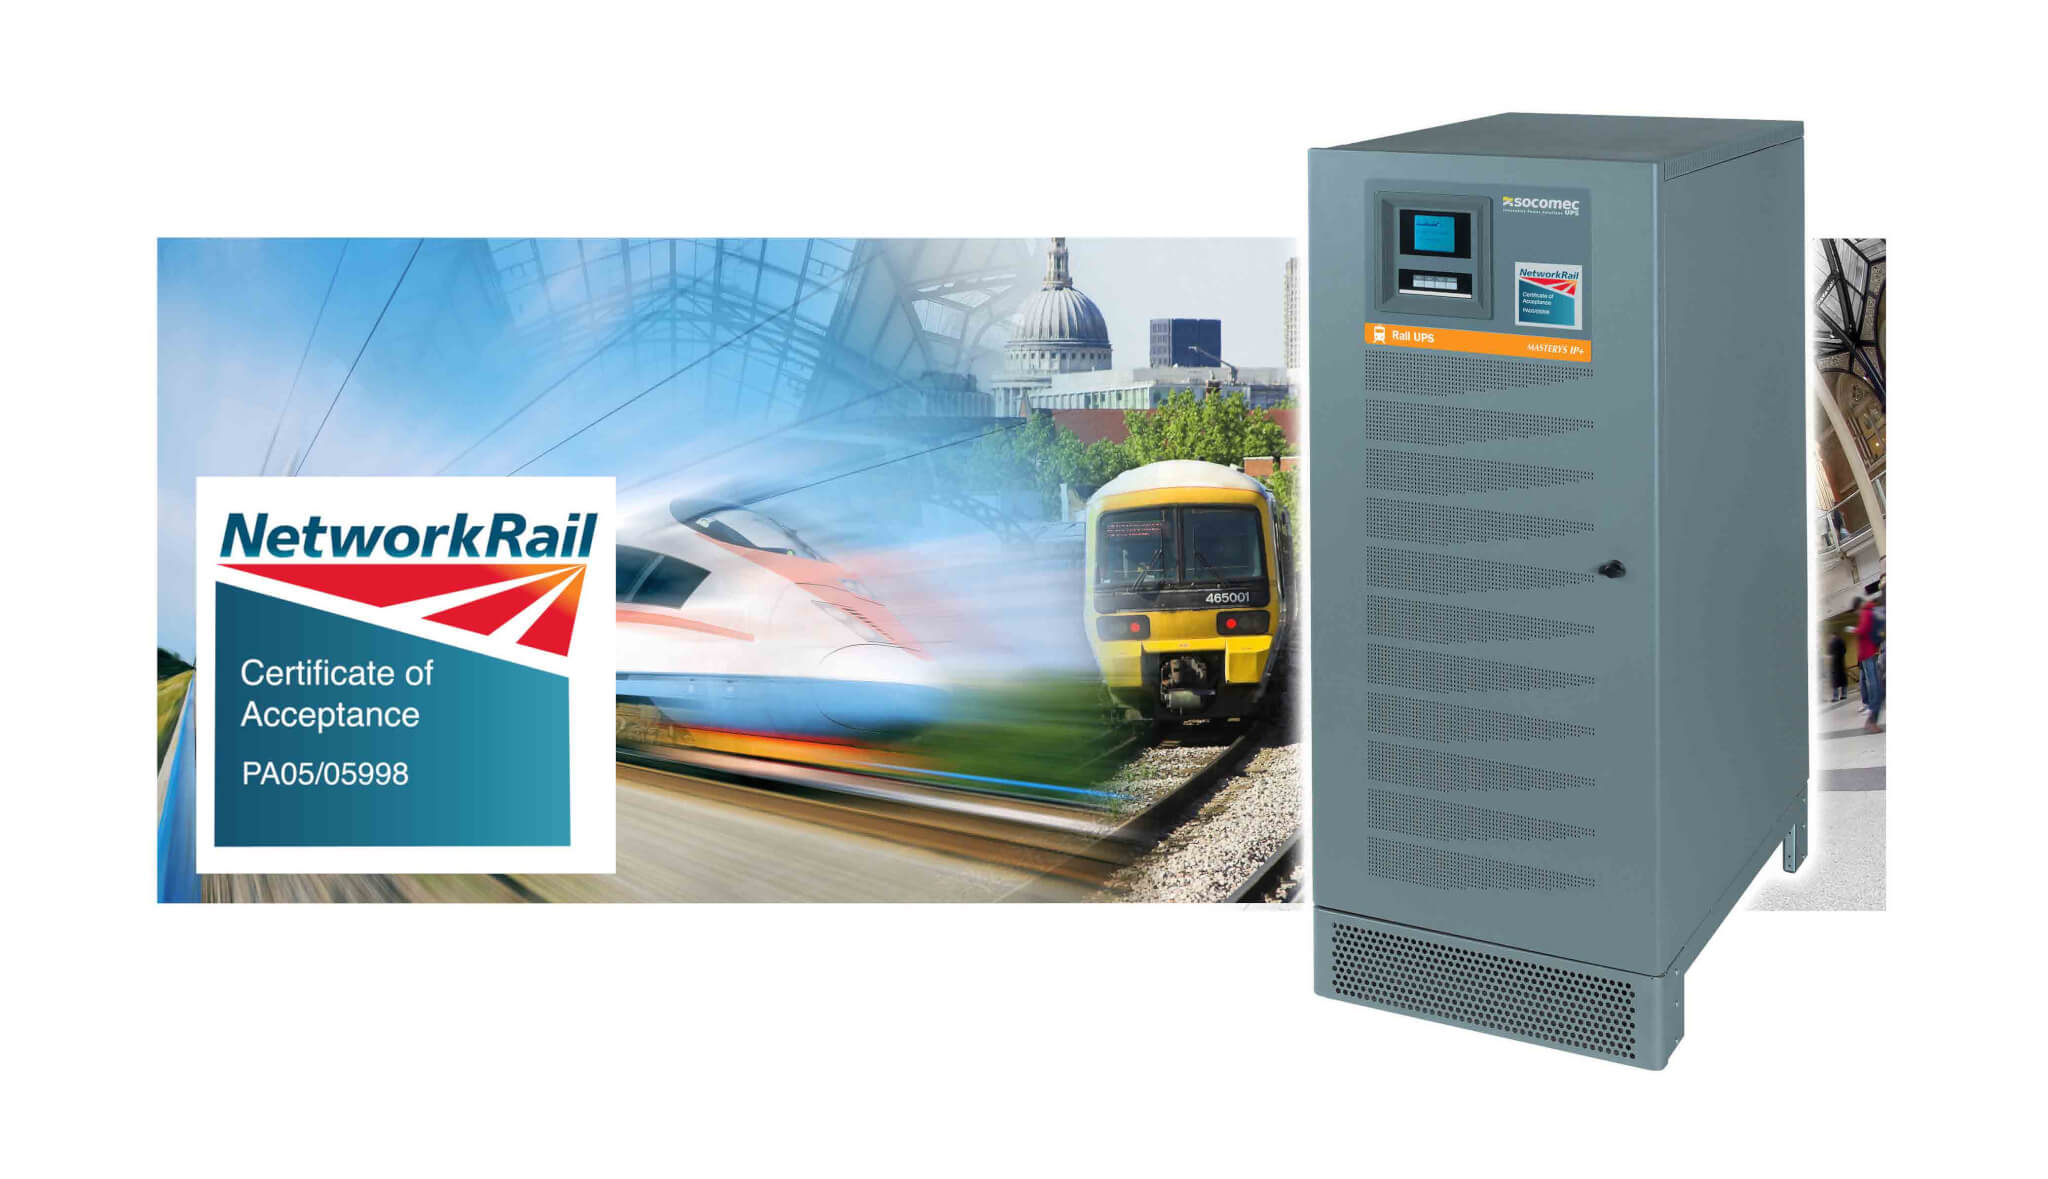 PADS Approved Supplier for Network Rail Product